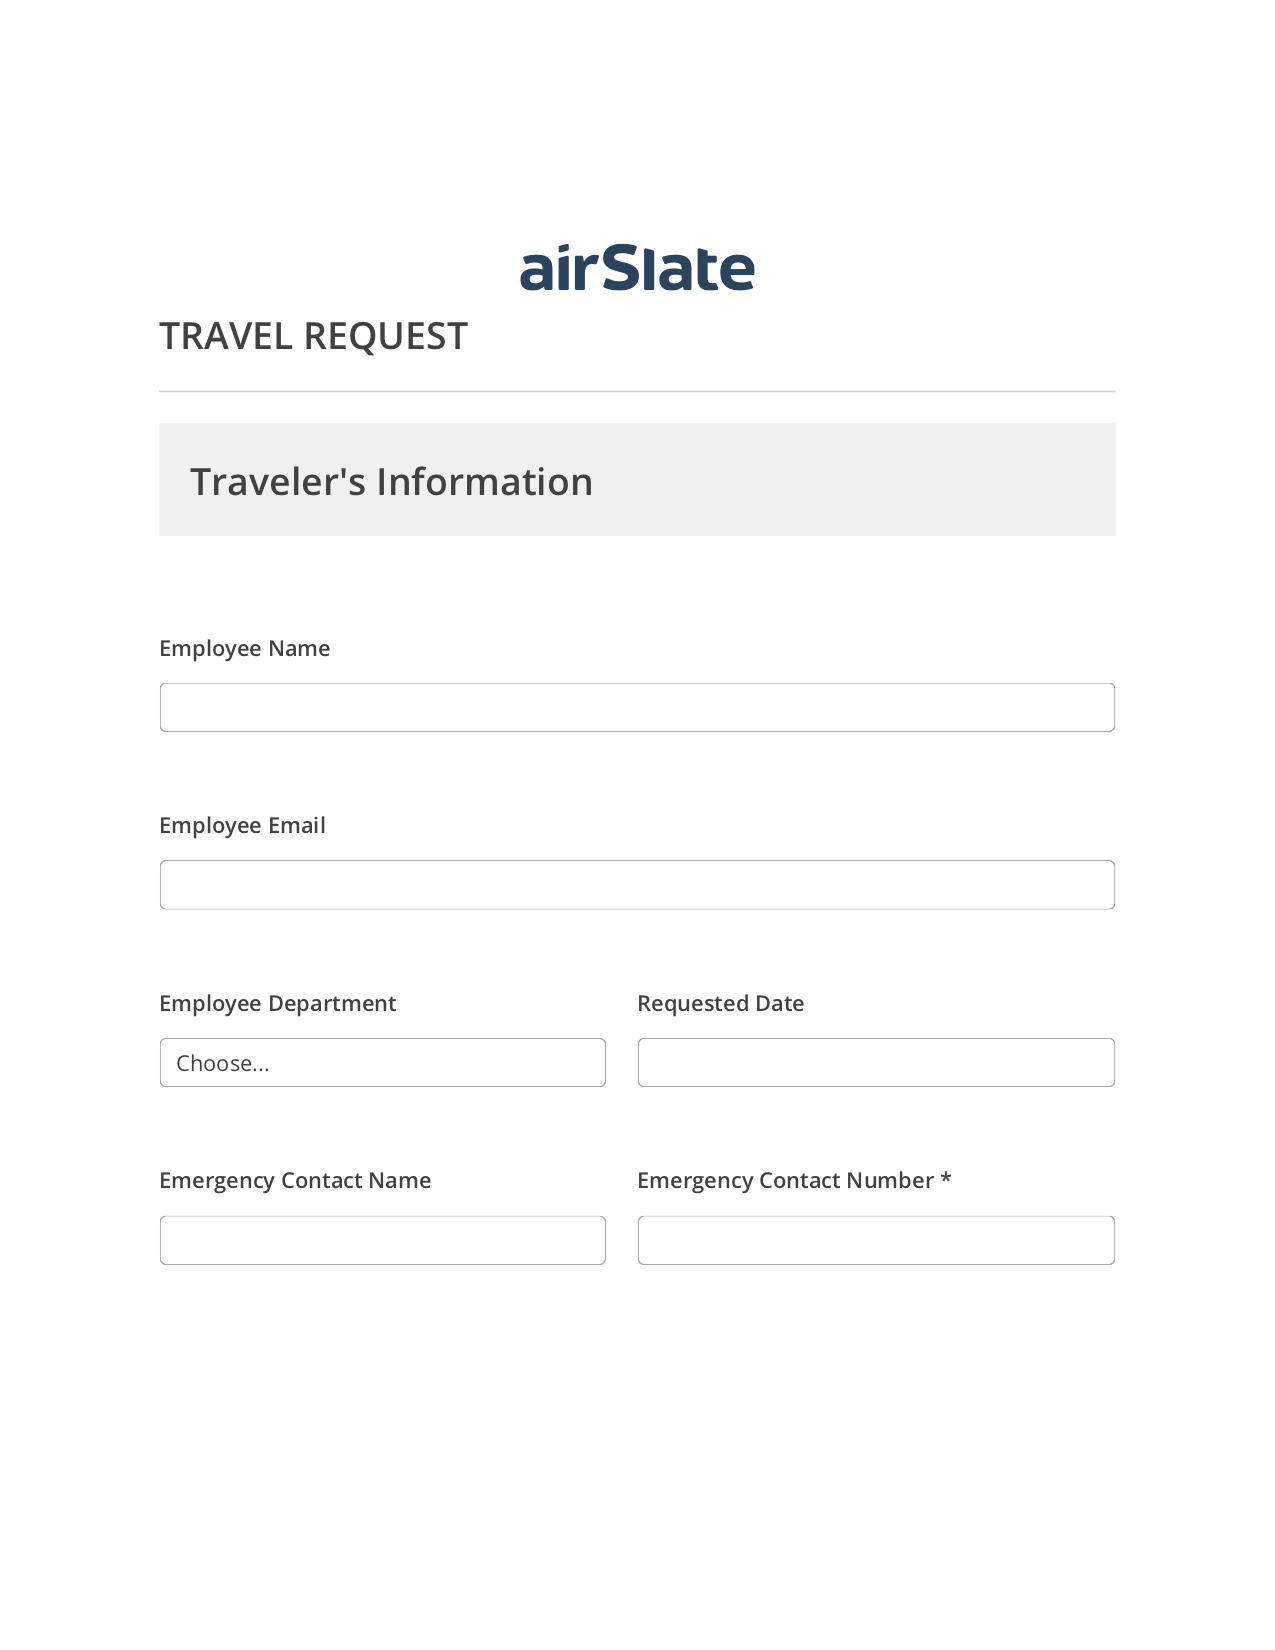 Travel Request Workflow Pre-fill from another Slate Bot, System Bot - Create a Slate in another Flow, Export to MySQL Bot